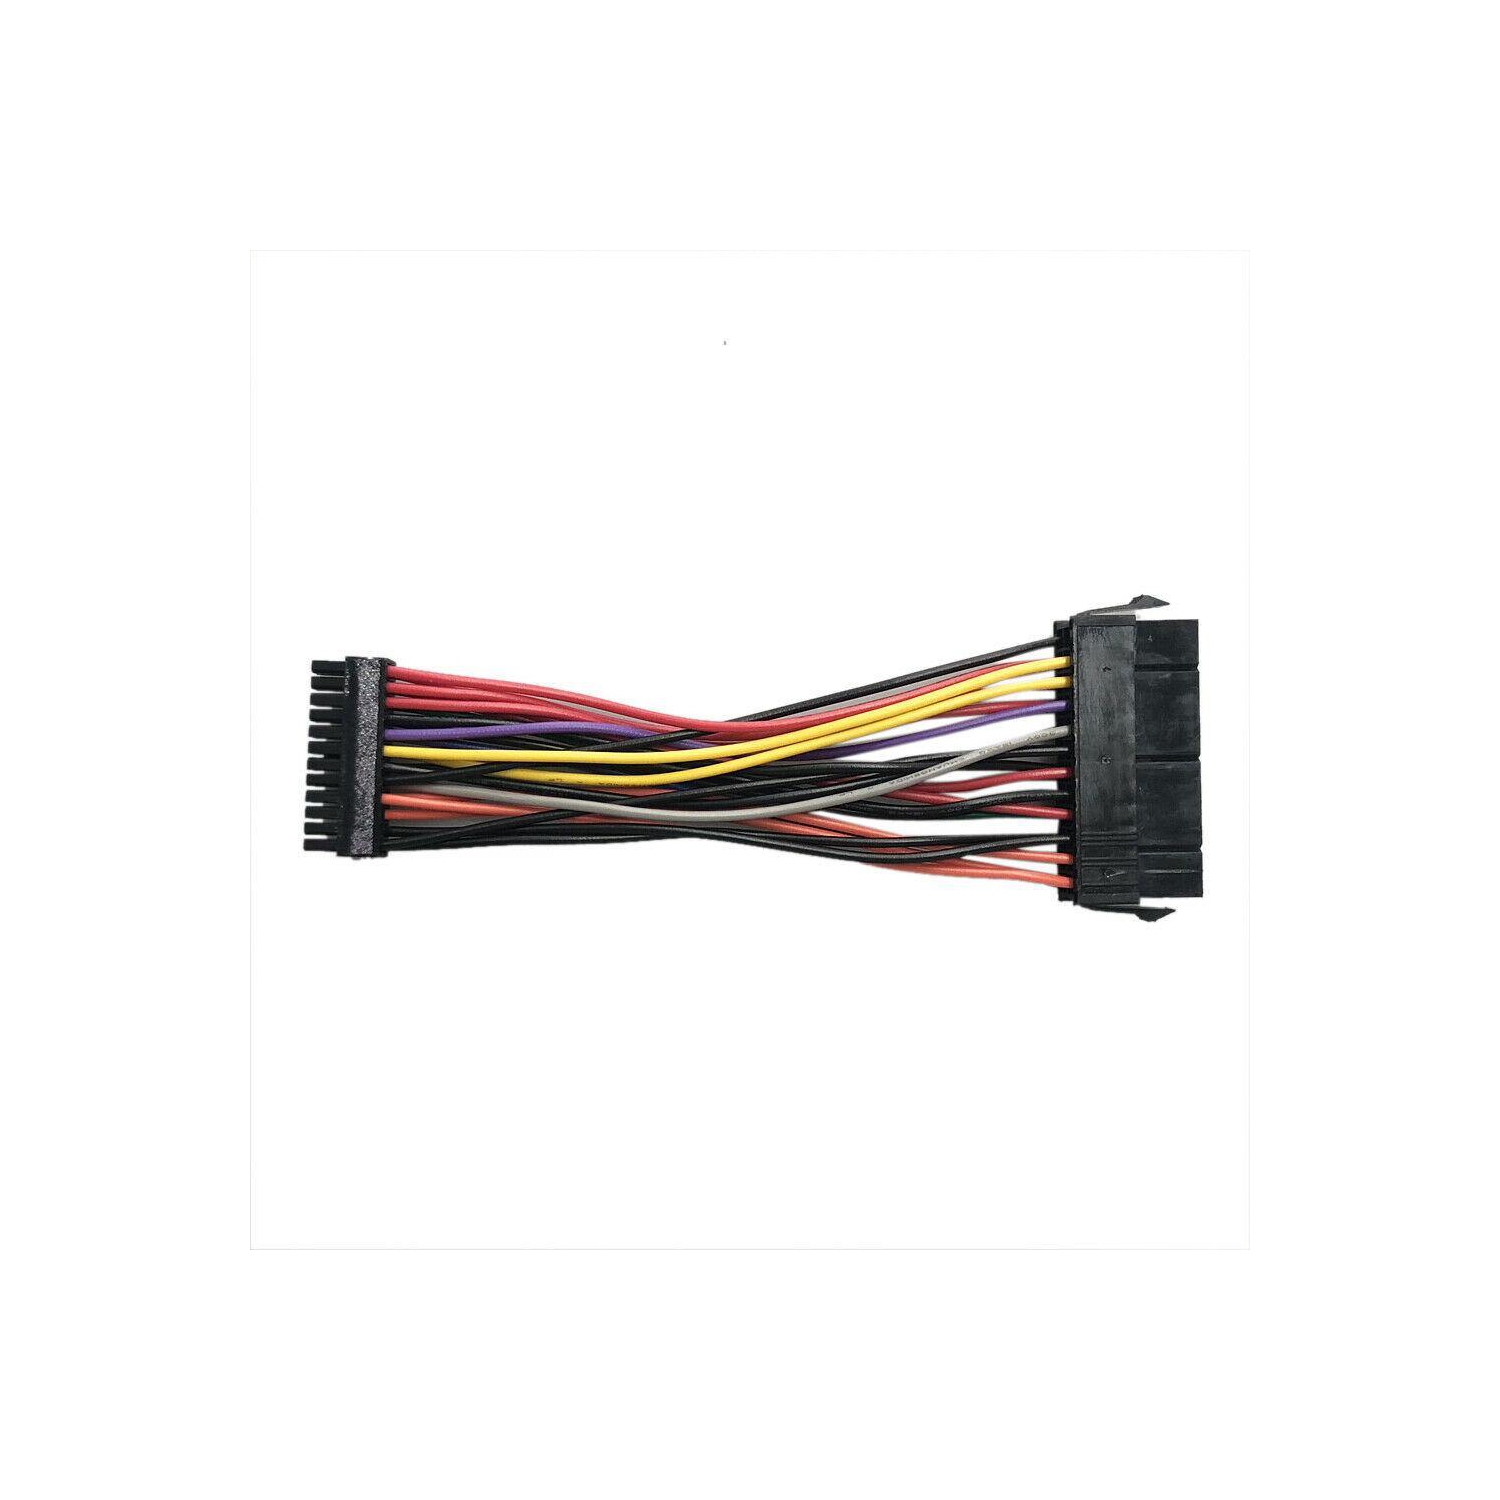 New ATX Power Supply 24 Pin to Mini 24 Pin Cable For Dell Optiplex 760 780 960 980